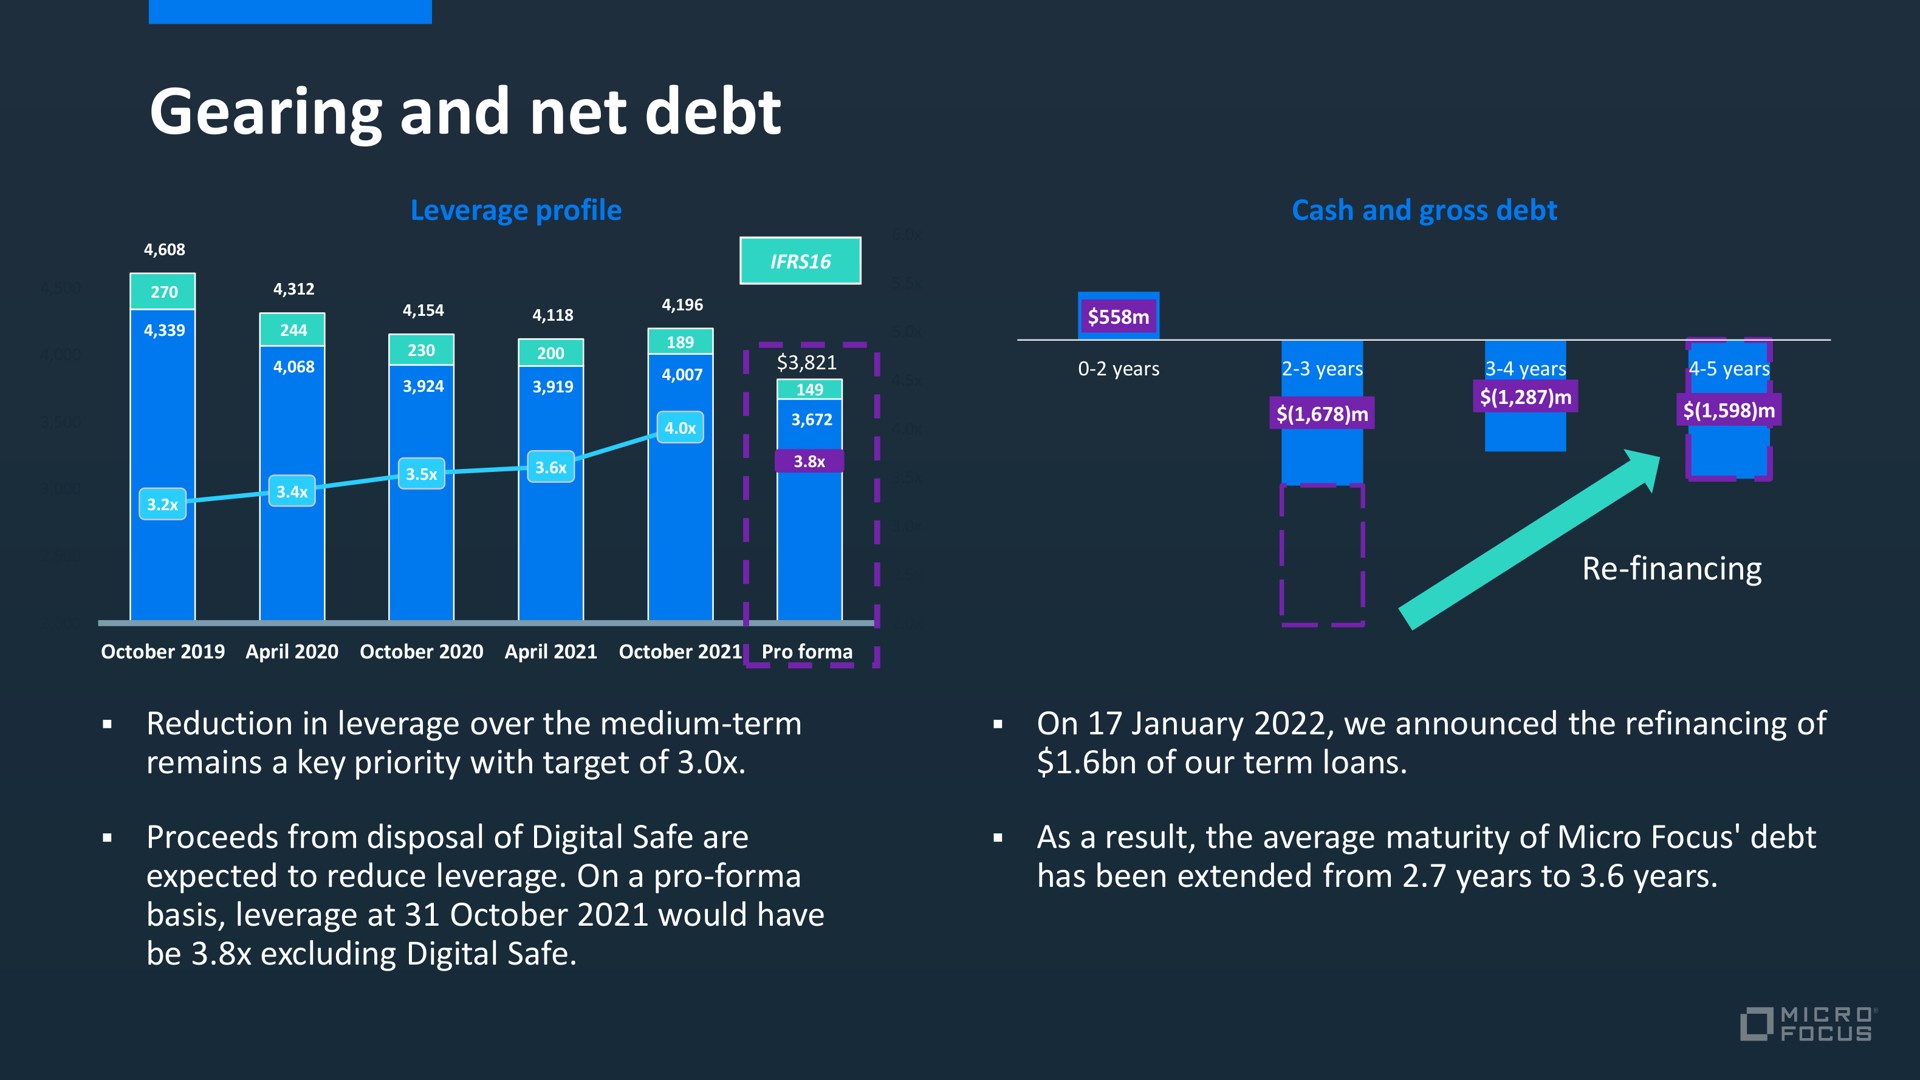 gearing and net debt | Micro Focus